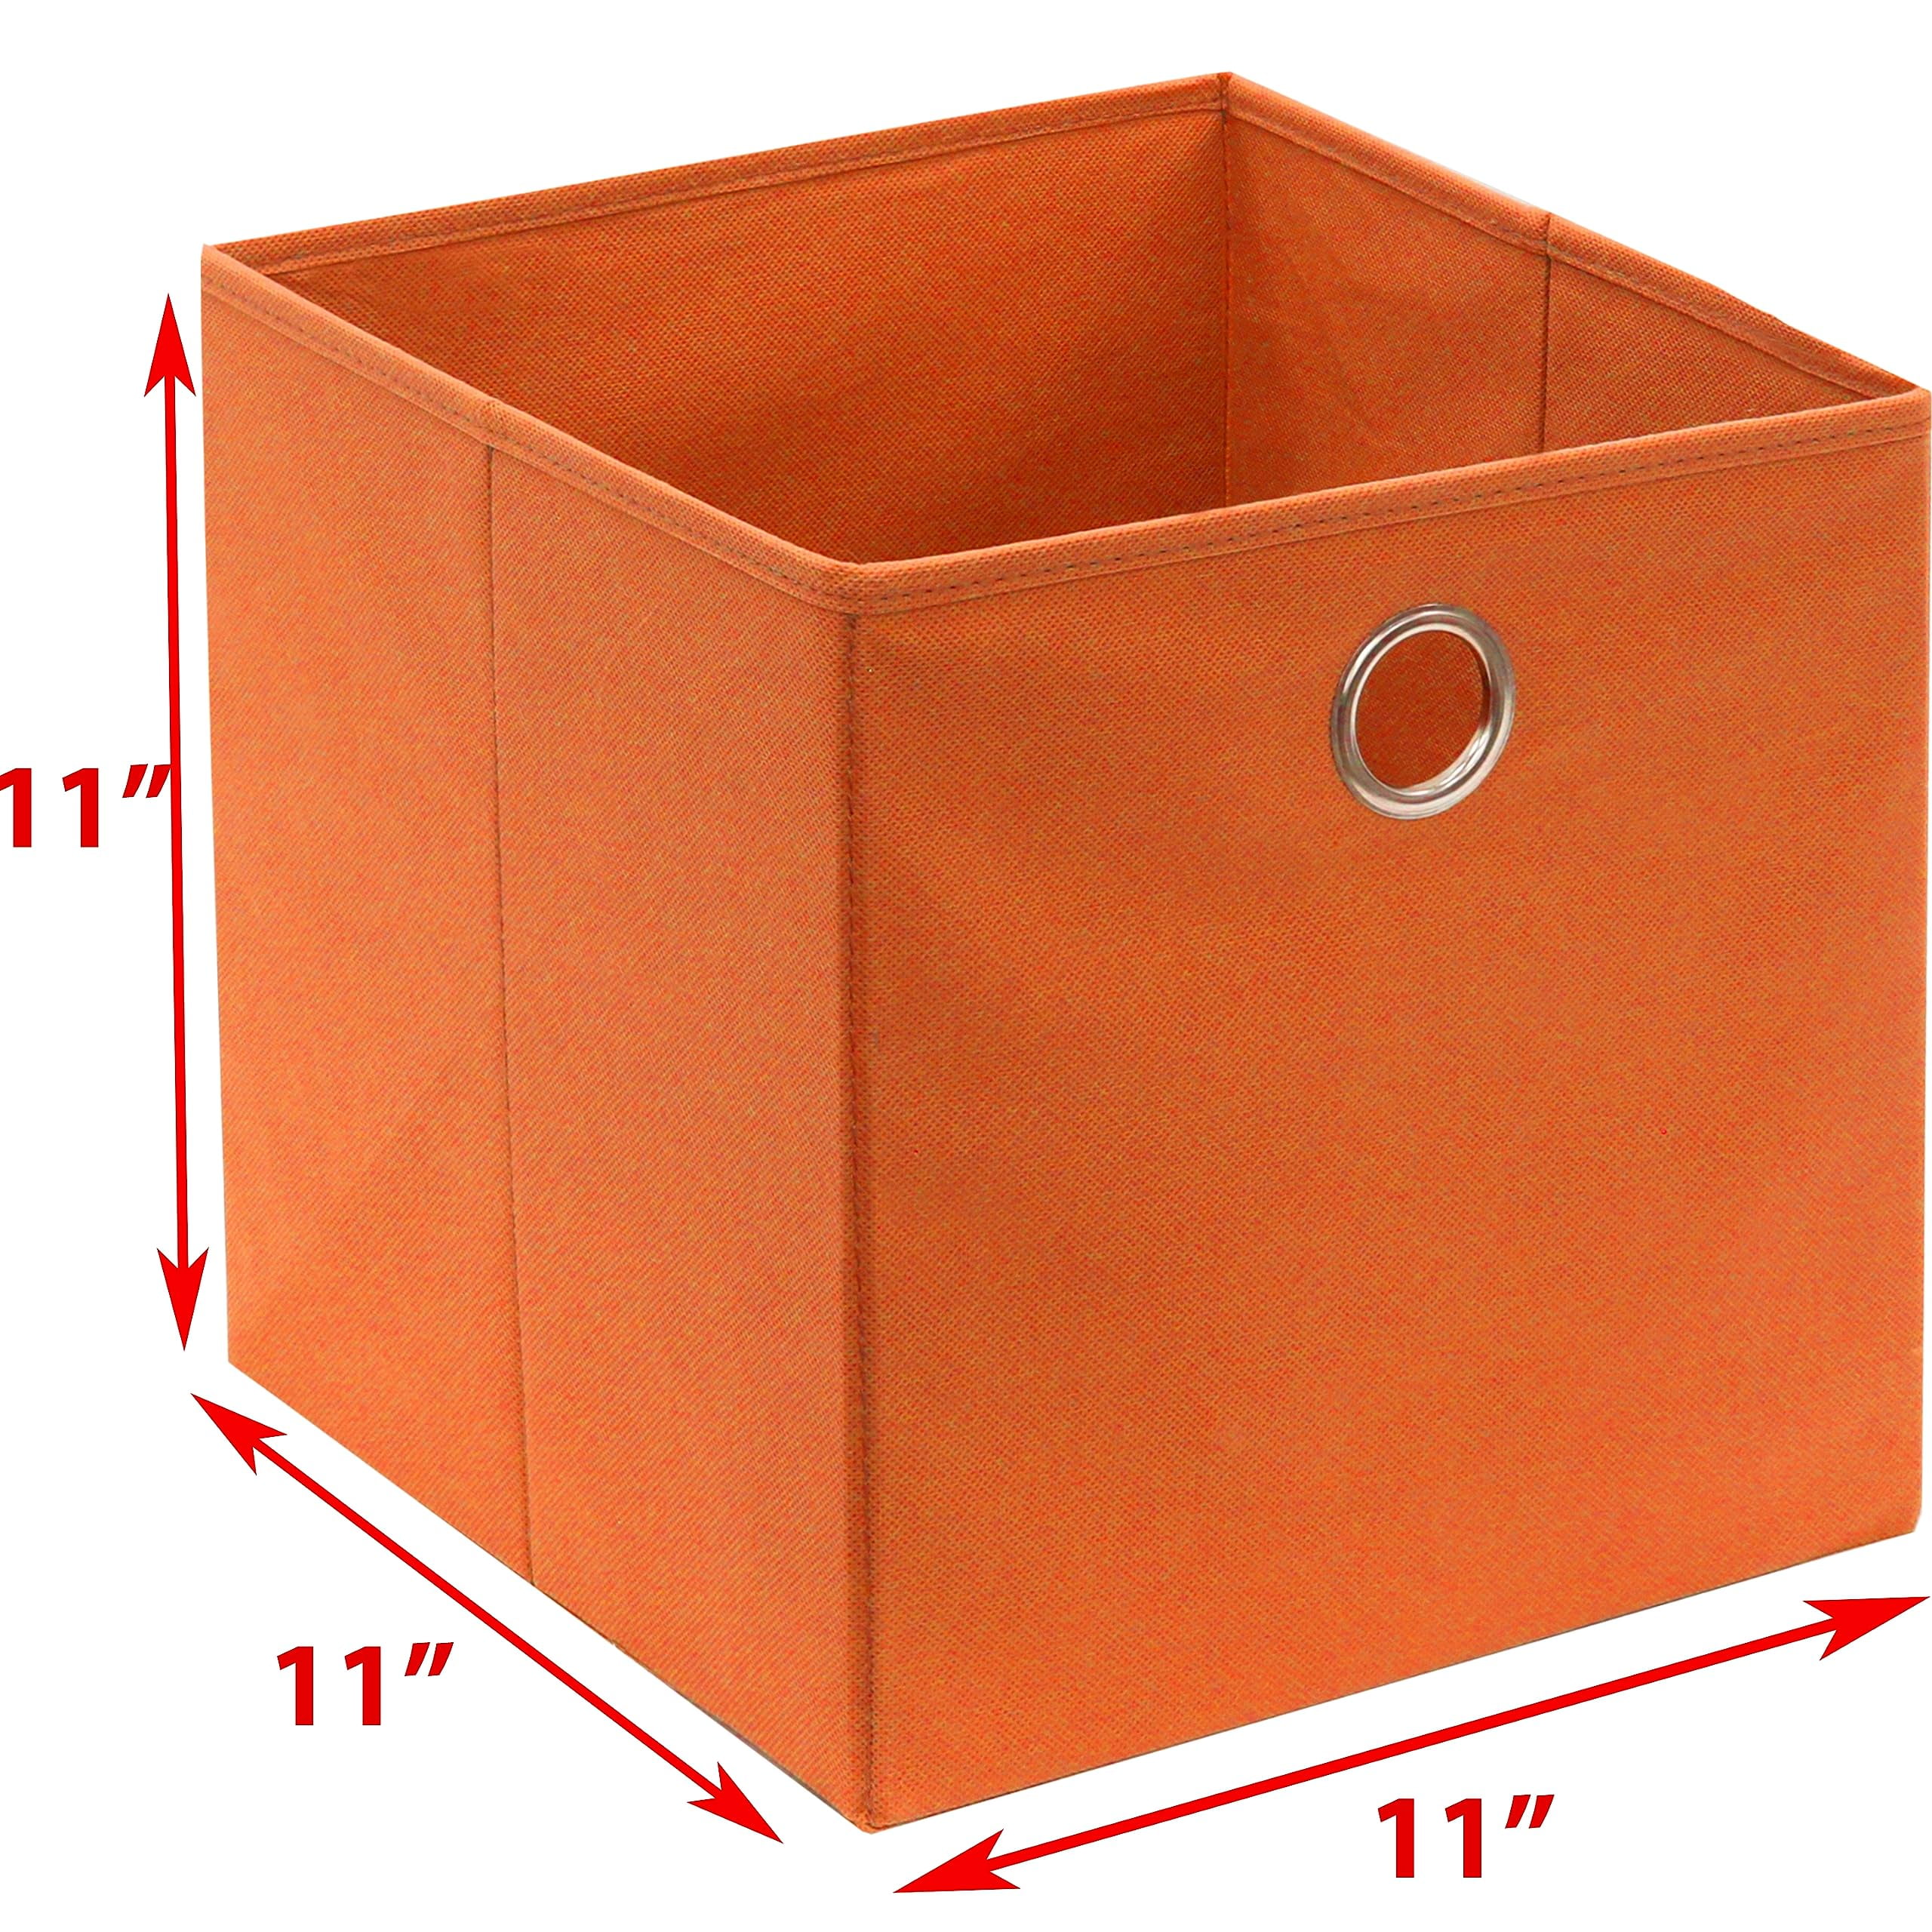 Foldable Storage Bins Basket Cube Organizer with Dual Handles and Window Pocket - 6 Pack Red Barrel Studio Color: Gray